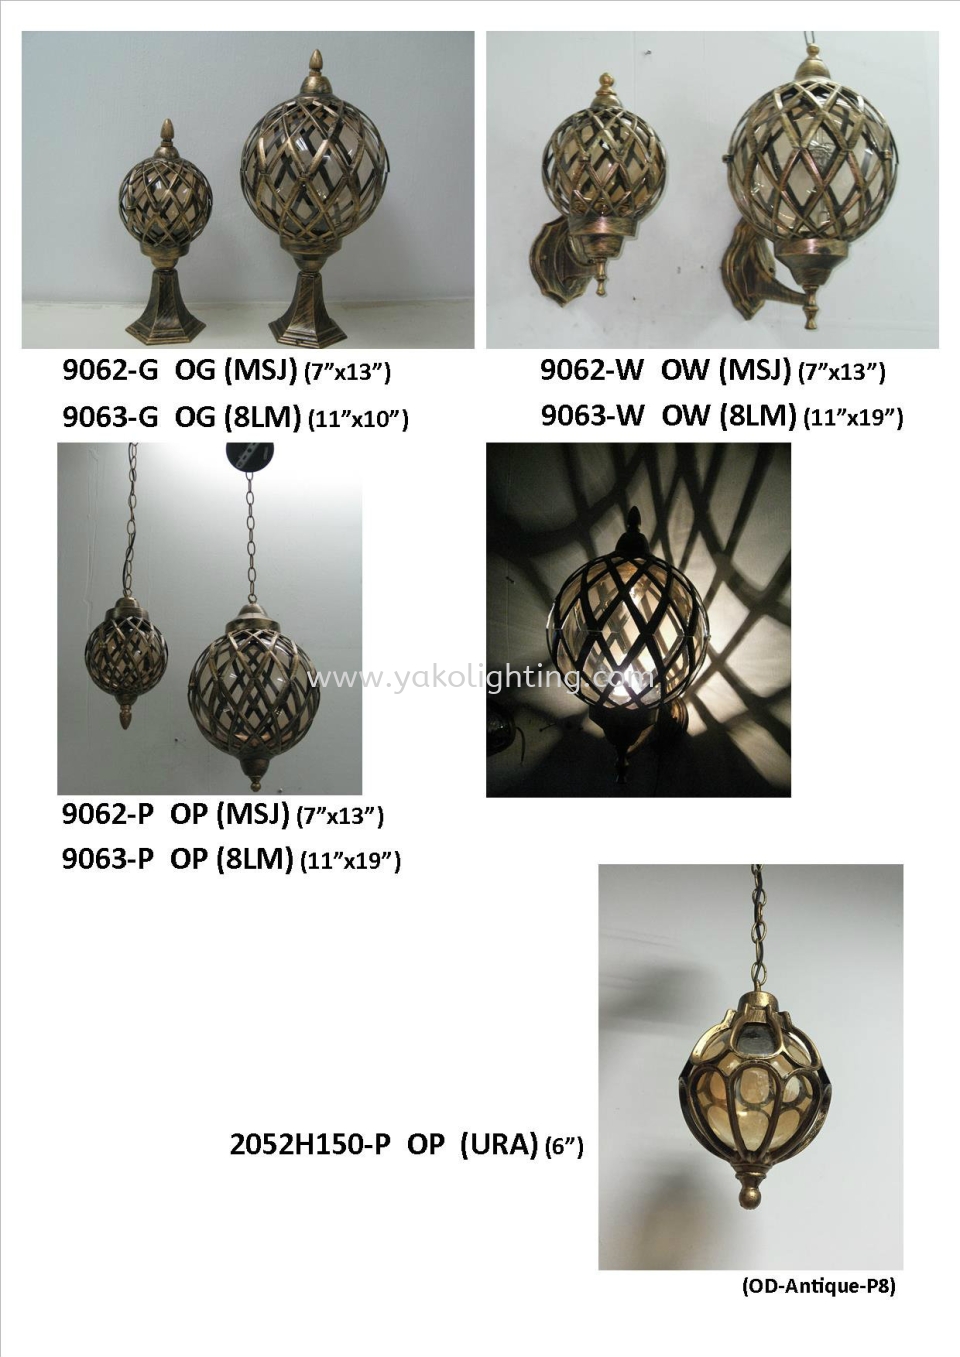 3029_1_OD-Antique-P8 OUTDOOR WALL LAMP 